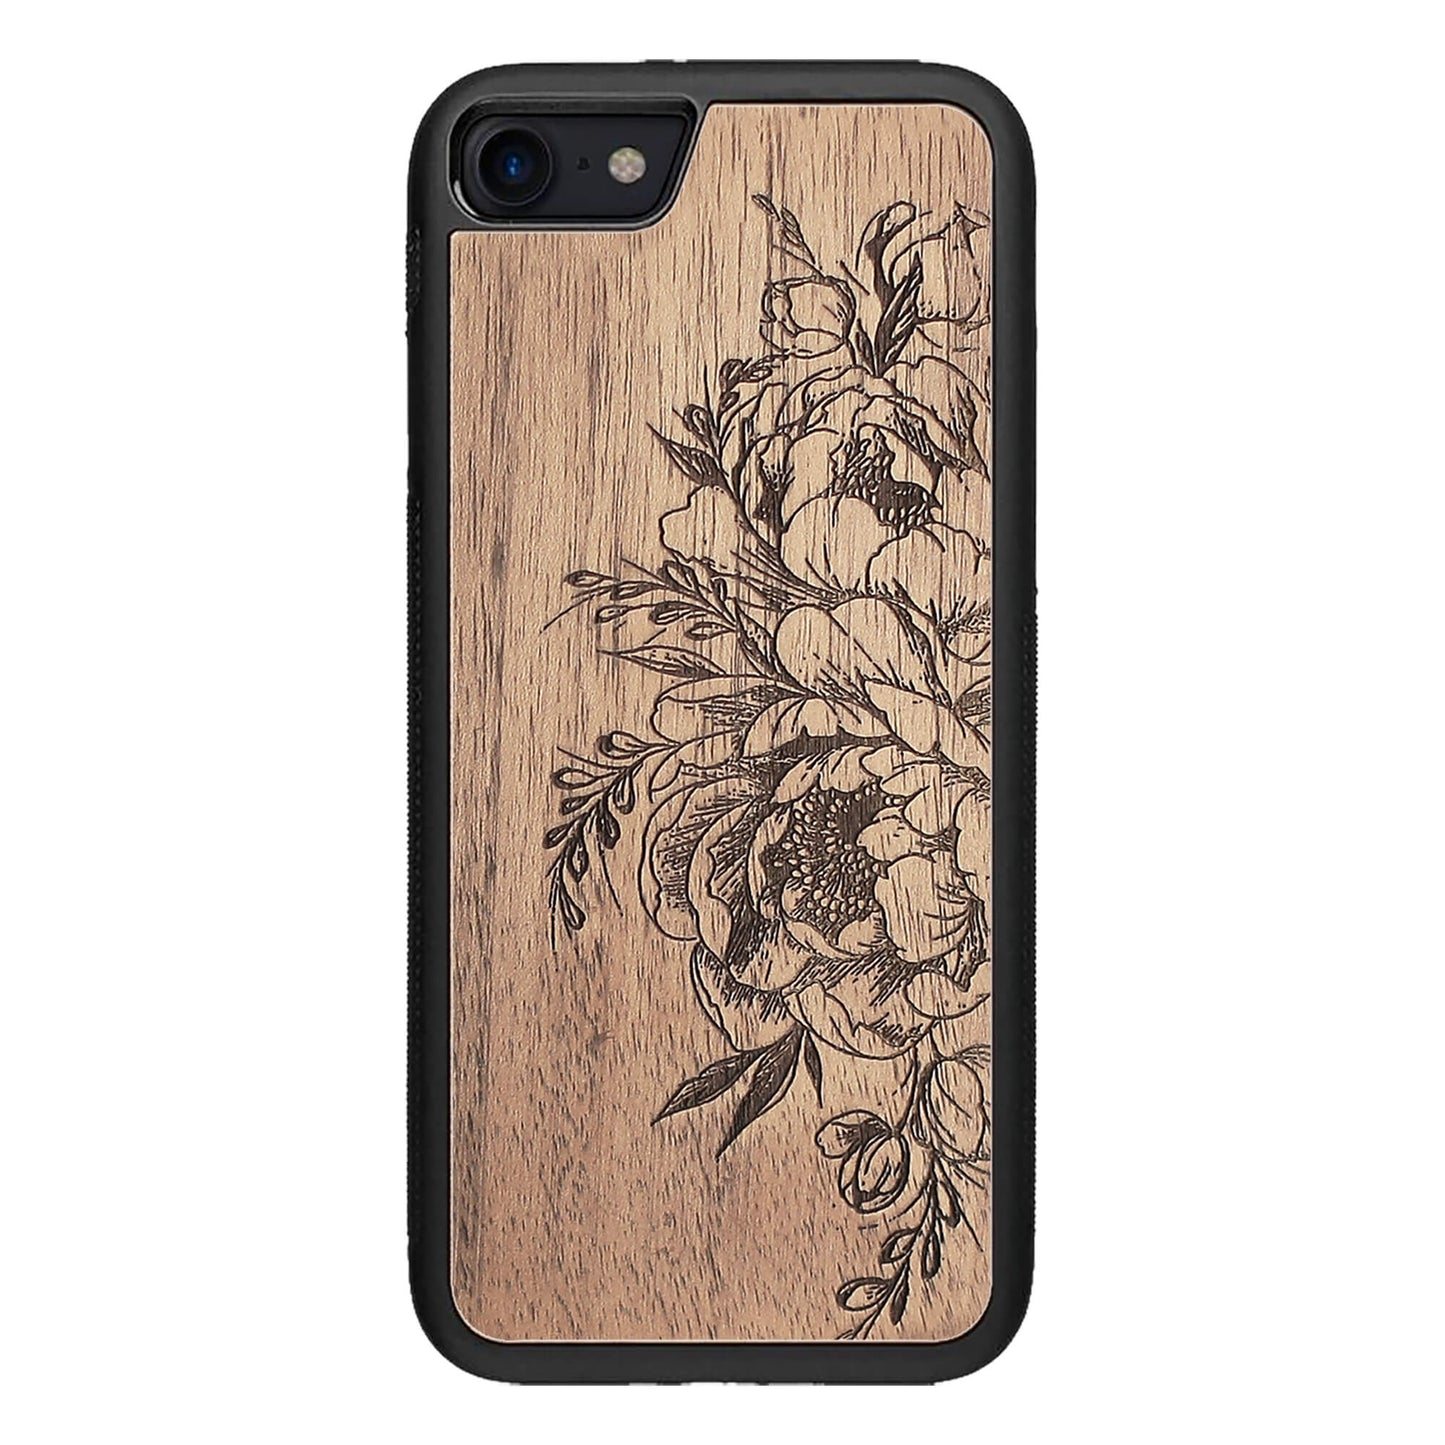 Wooden Case for iPhone SE 2 generation case Flowers